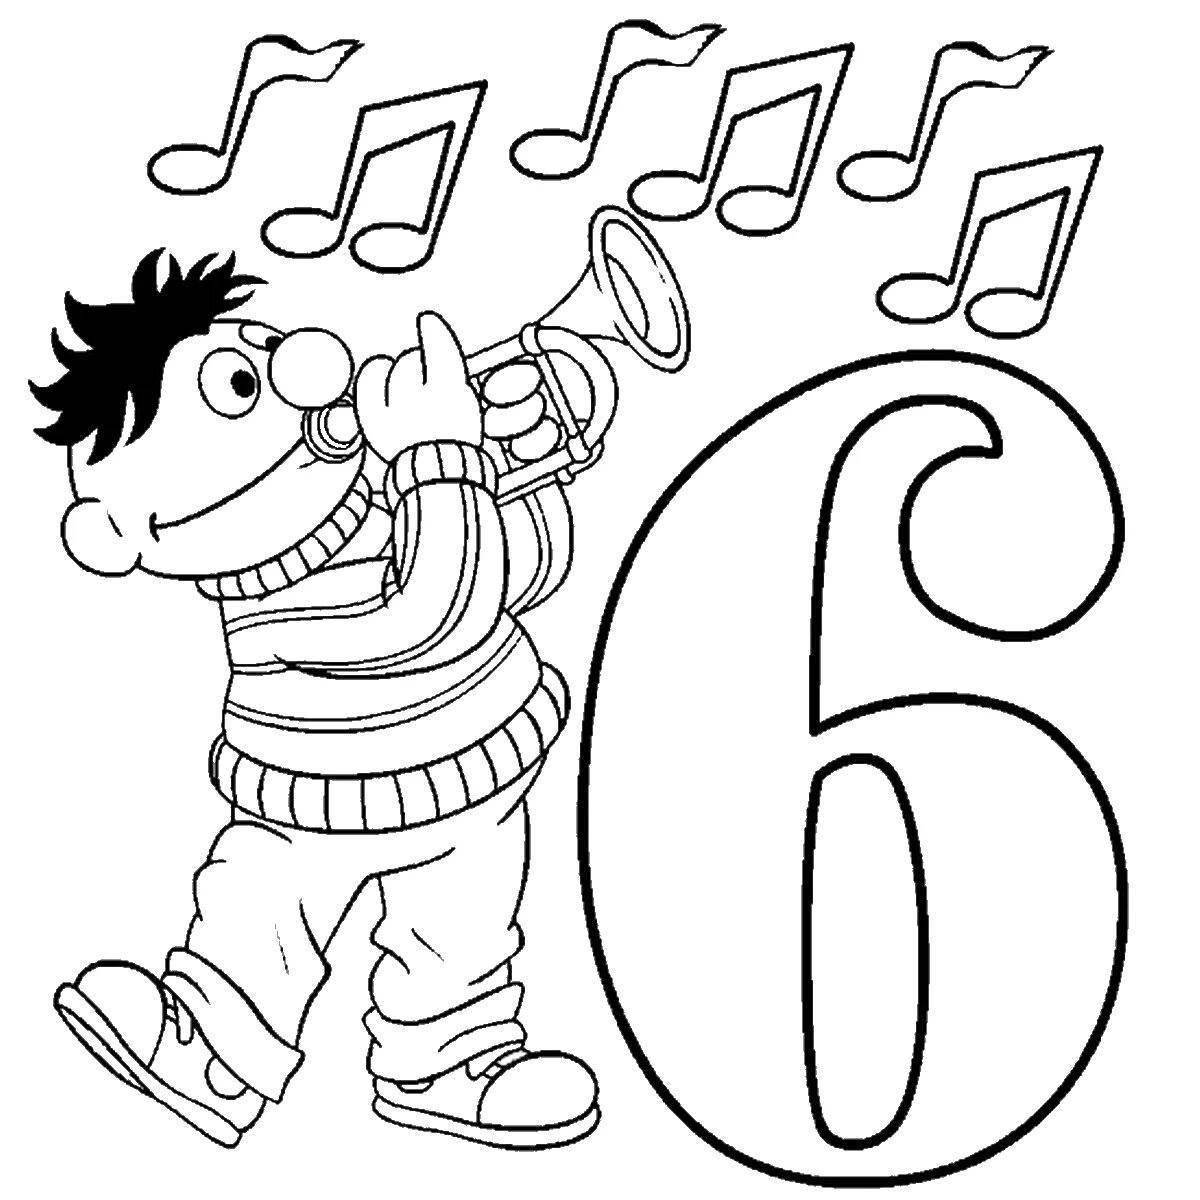 Kind coloring page 6